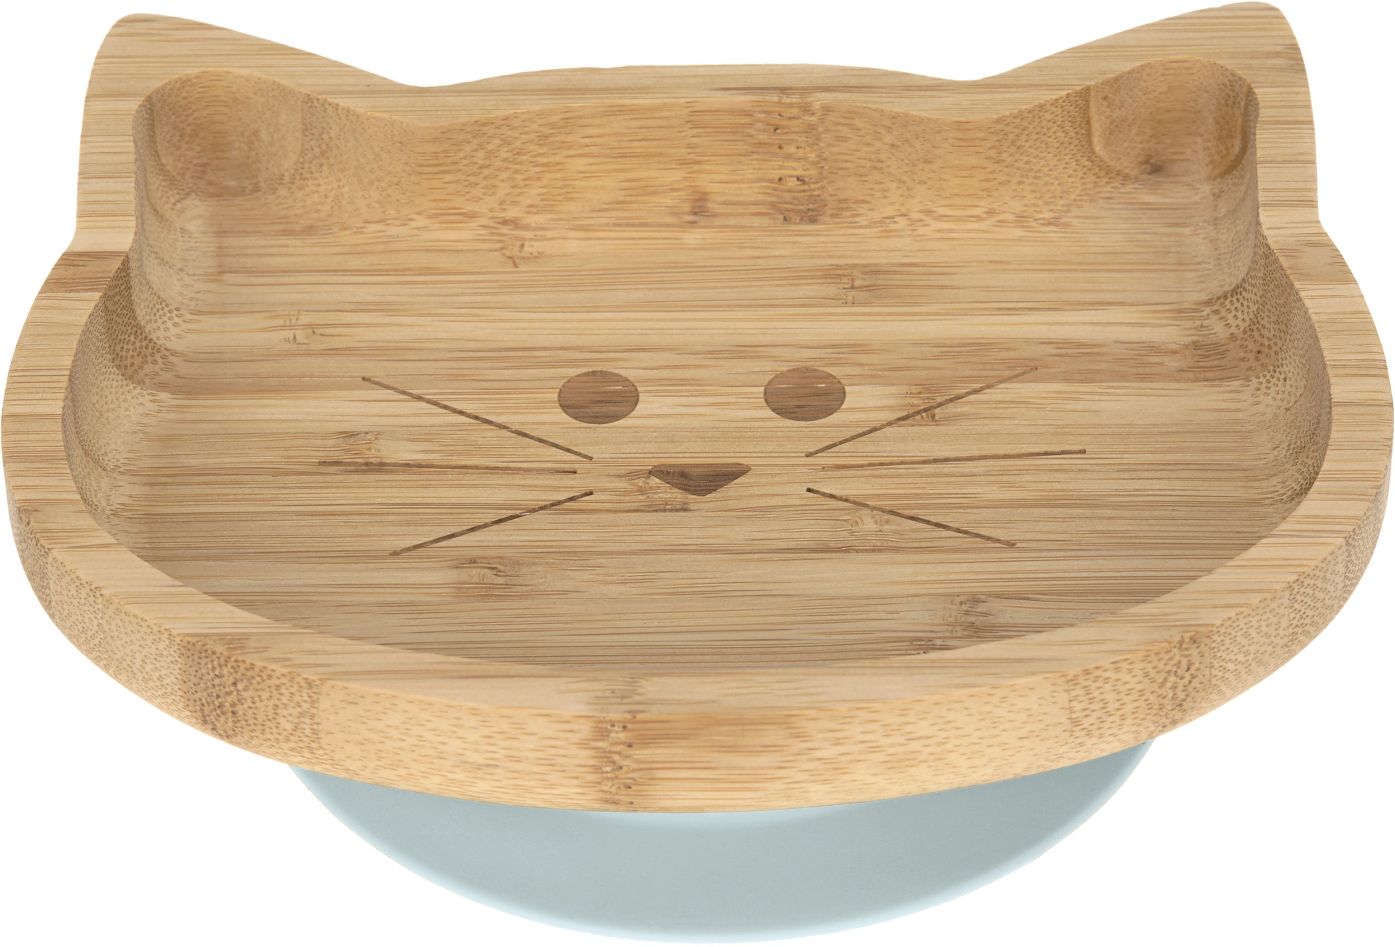 Lassig Platter Bamboo/Wood Little Chums Cat with suction pad/silicone